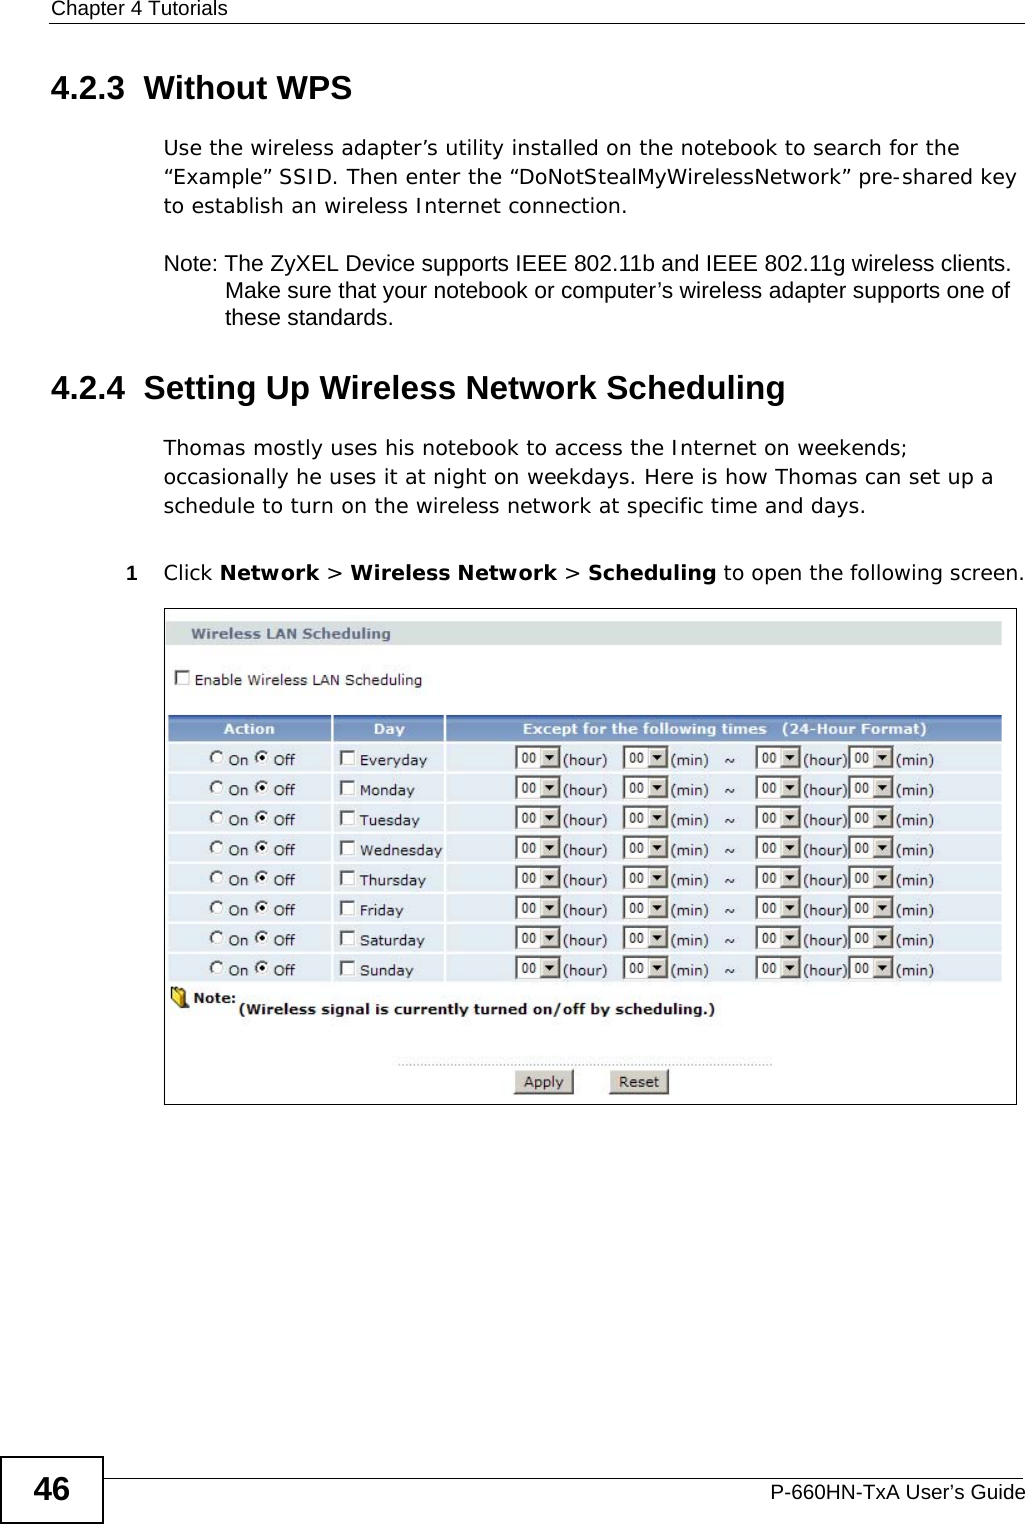 Chapter 4 TutorialsP-660HN-TxA User’s Guide464.2.3  Without WPSUse the wireless adapter’s utility installed on the notebook to search for the “Example” SSID. Then enter the “DoNotStealMyWirelessNetwork” pre-shared key to establish an wireless Internet connection.Note: The ZyXEL Device supports IEEE 802.11b and IEEE 802.11g wireless clients. Make sure that your notebook or computer’s wireless adapter supports one of these standards.4.2.4  Setting Up Wireless Network SchedulingThomas mostly uses his notebook to access the Internet on weekends; occasionally he uses it at night on weekdays. Here is how Thomas can set up a schedule to turn on the wireless network at specific time and days.1Click Network &gt; Wireless Network &gt; Scheduling to open the following screen.